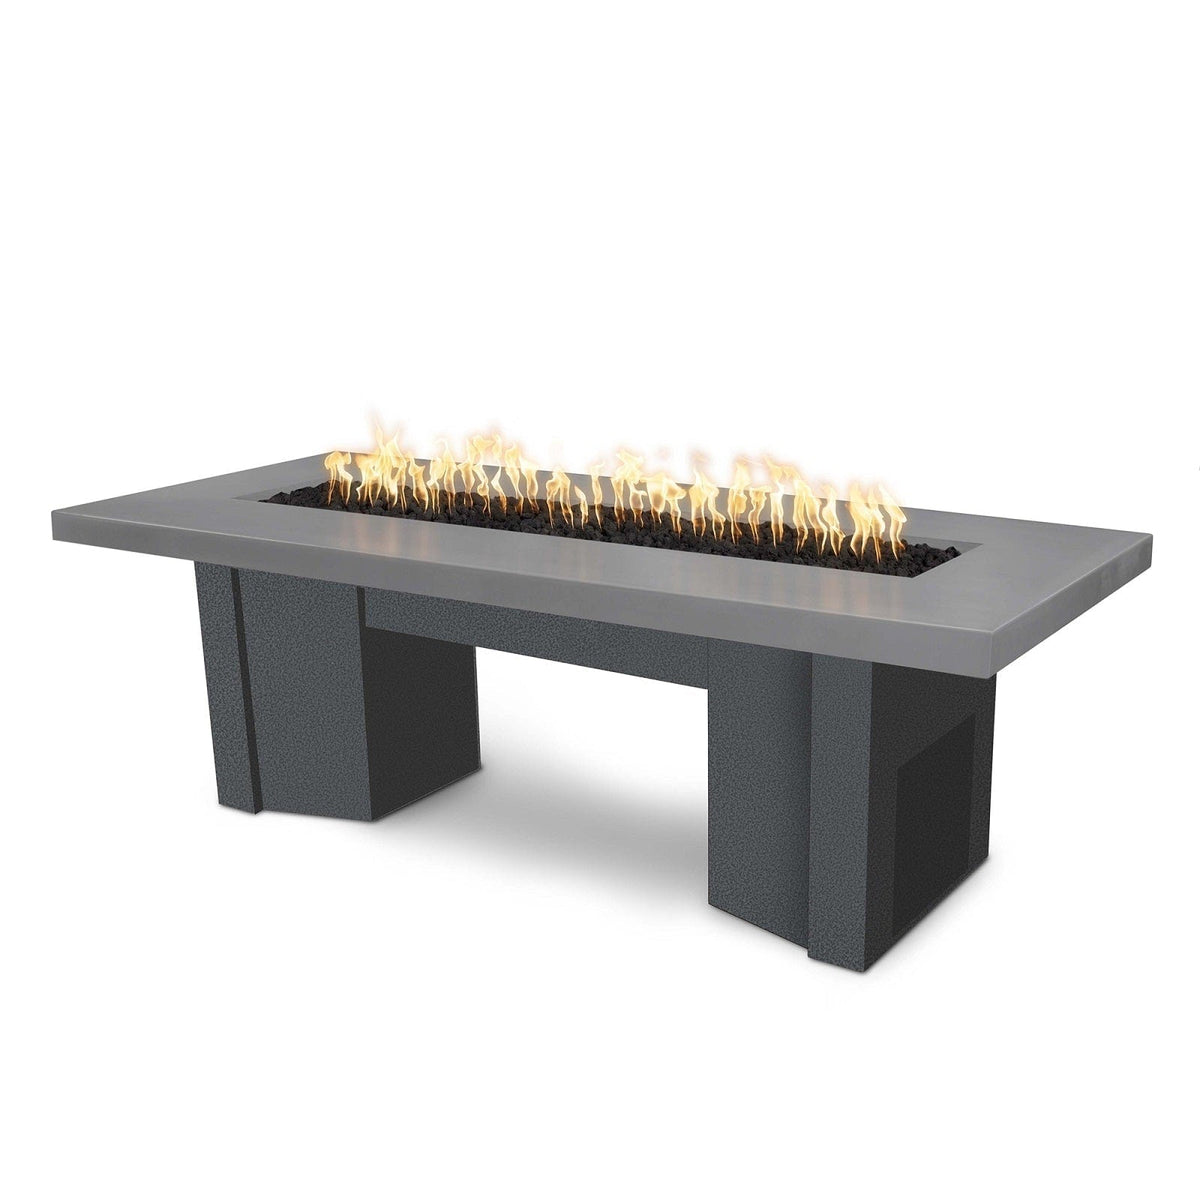 The Outdoor Plus Fire Features Natural Gray (-NGY) / Silver Vein Powder Coated Steel (-SLV) The Outdoor Plus 60&quot; Alameda Fire Table Smooth Concrete in Liquid Propane - 110V Plug &amp; Play Electronic Ignition / OPT-ALMGFRC60EKIT-LP